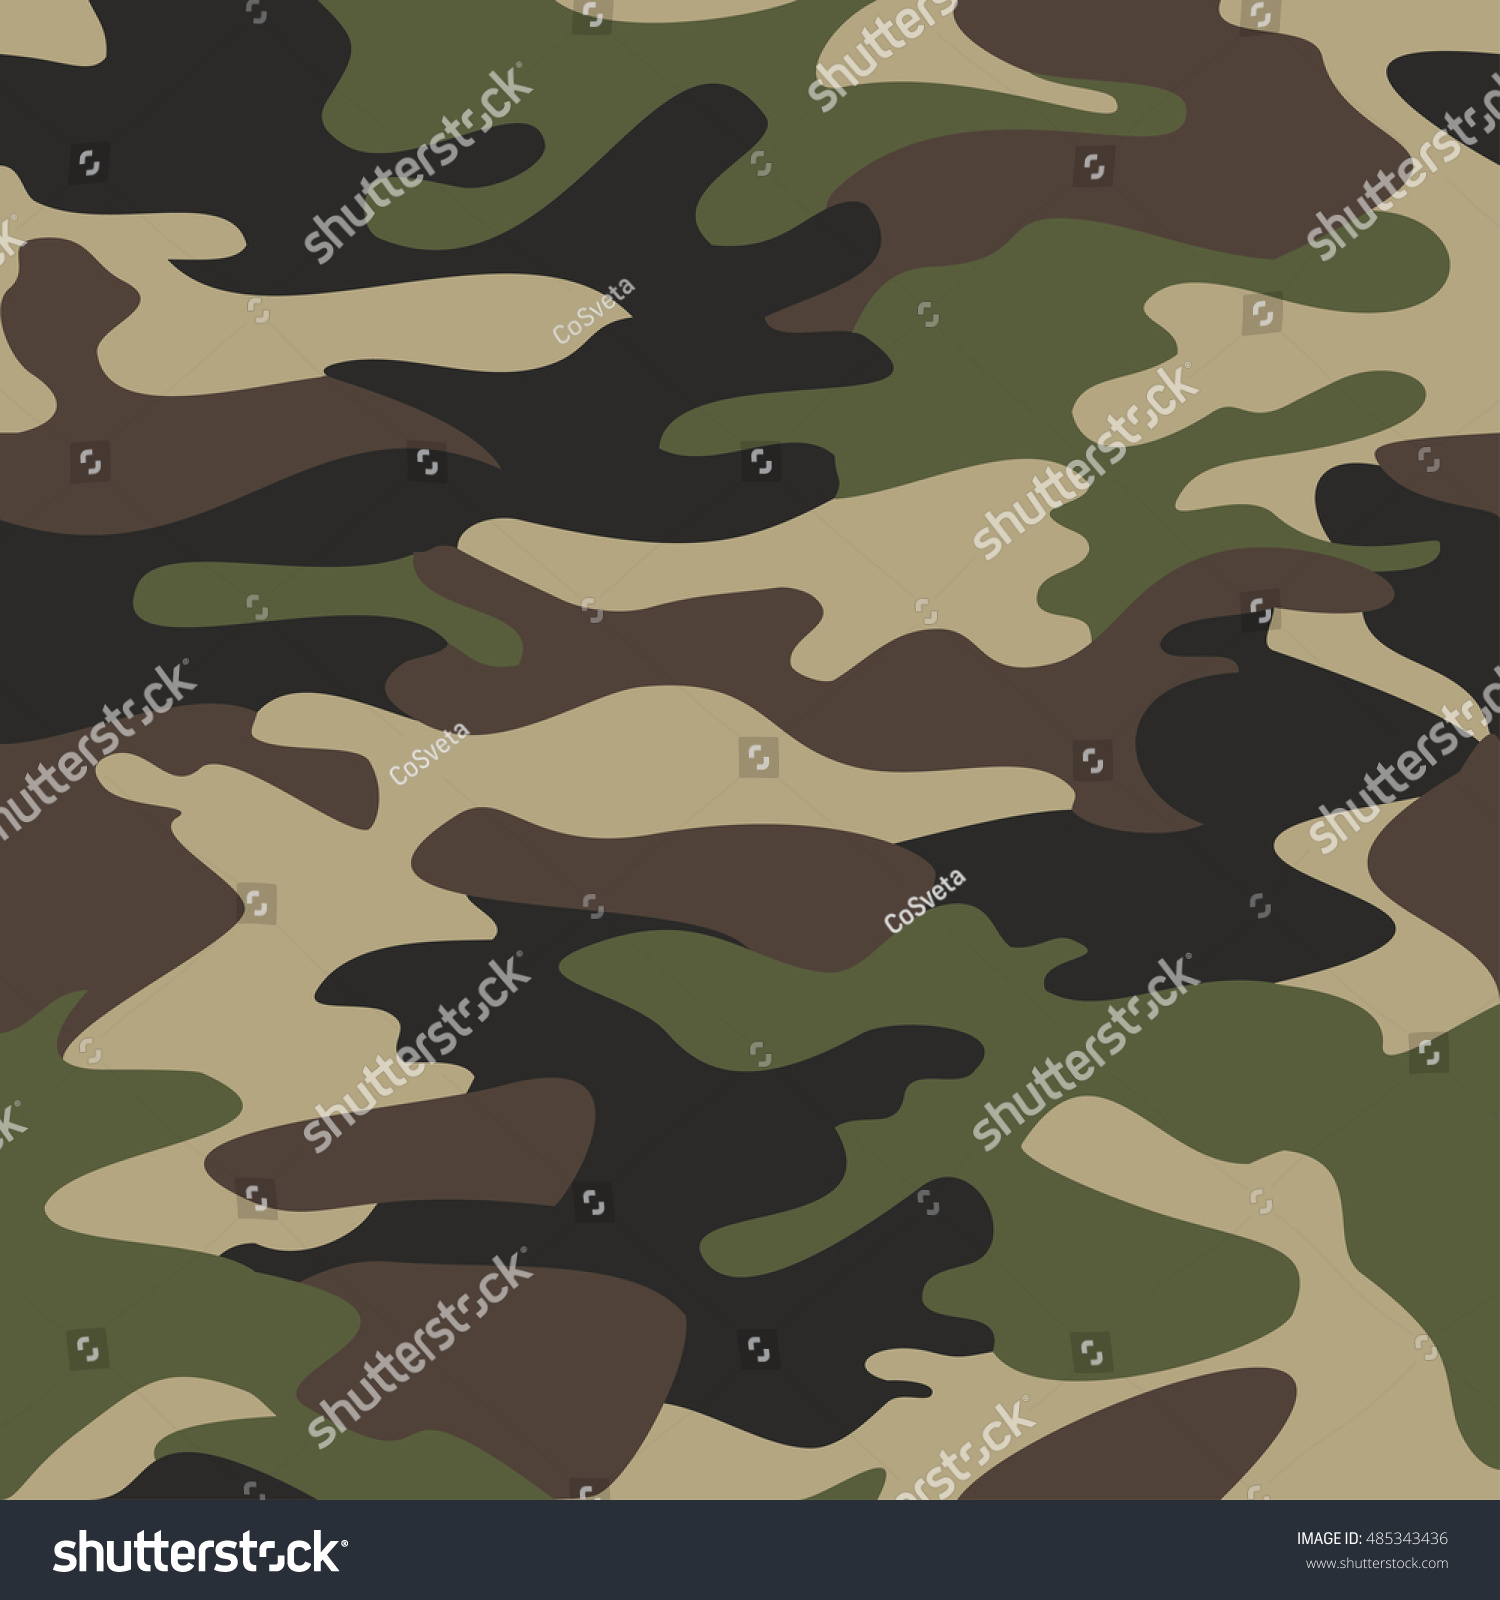 SVG of Camouflage pattern background seamless vector illustration. Classic clothing style masking camo repeat print. Green brown black olive colors forest texture svg